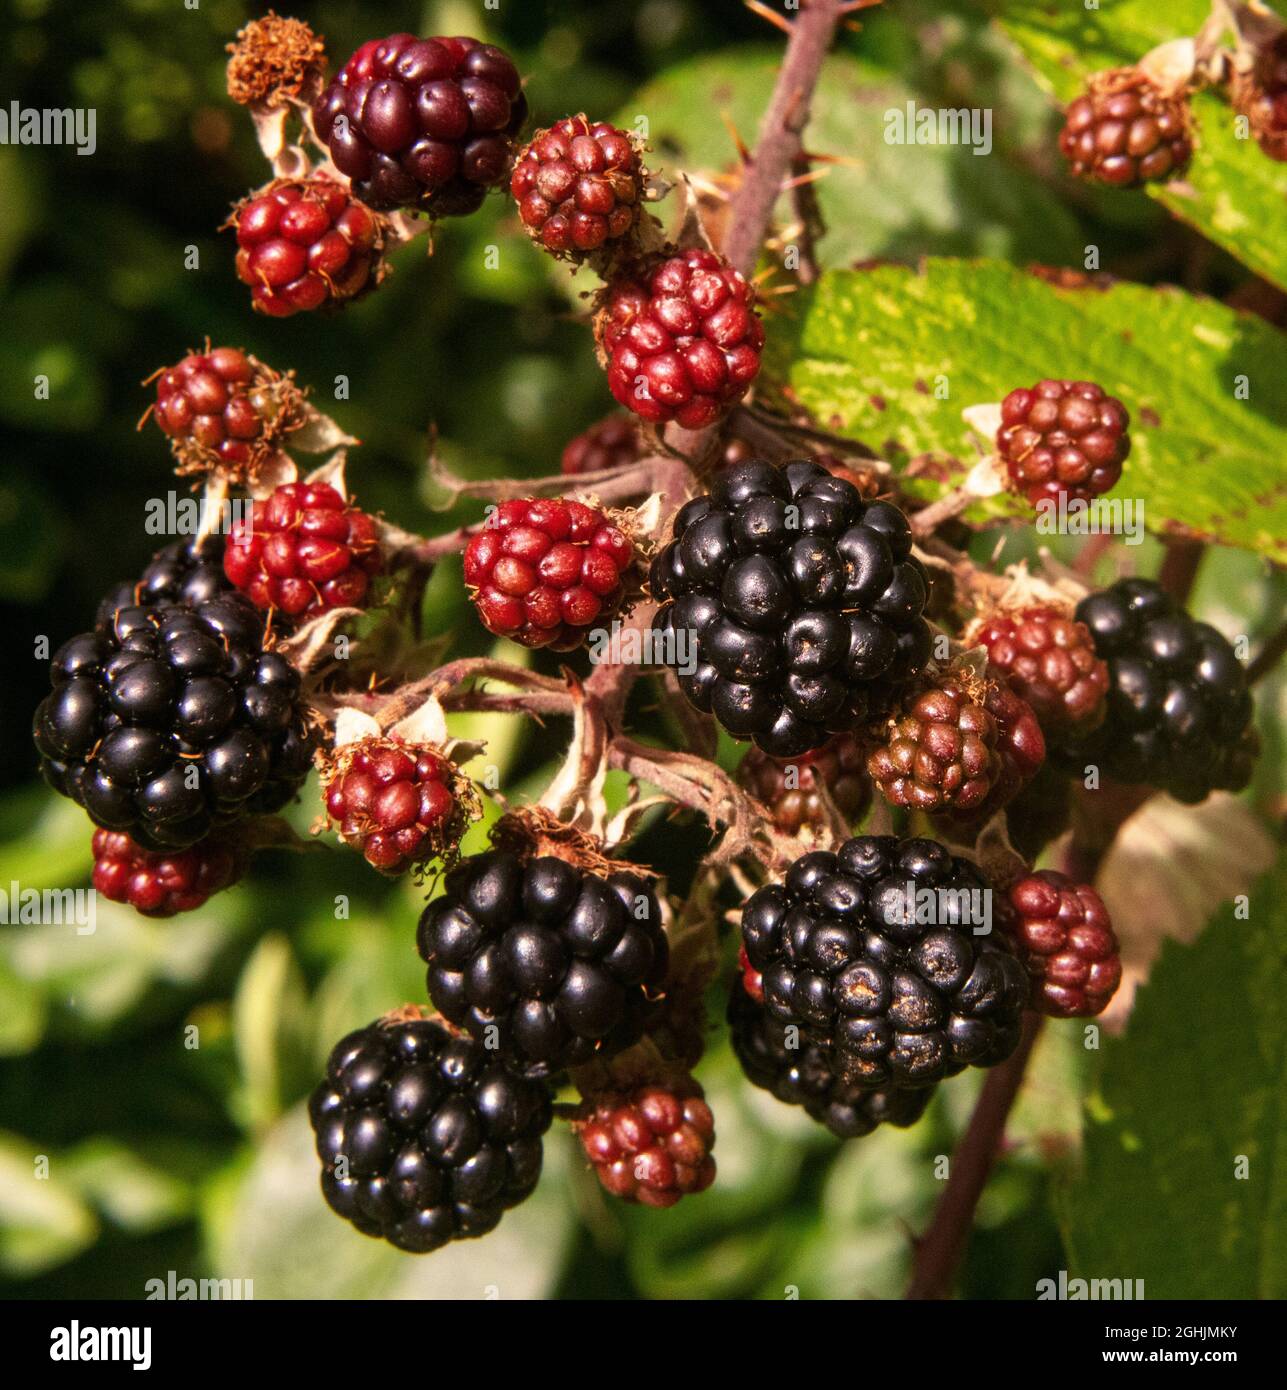 Blackberries on the bush; some ripe, others red and unripe, in a garden in Sussex, UK; an edible fruit in the genus Rubus, family Rosaceae Stock Photo